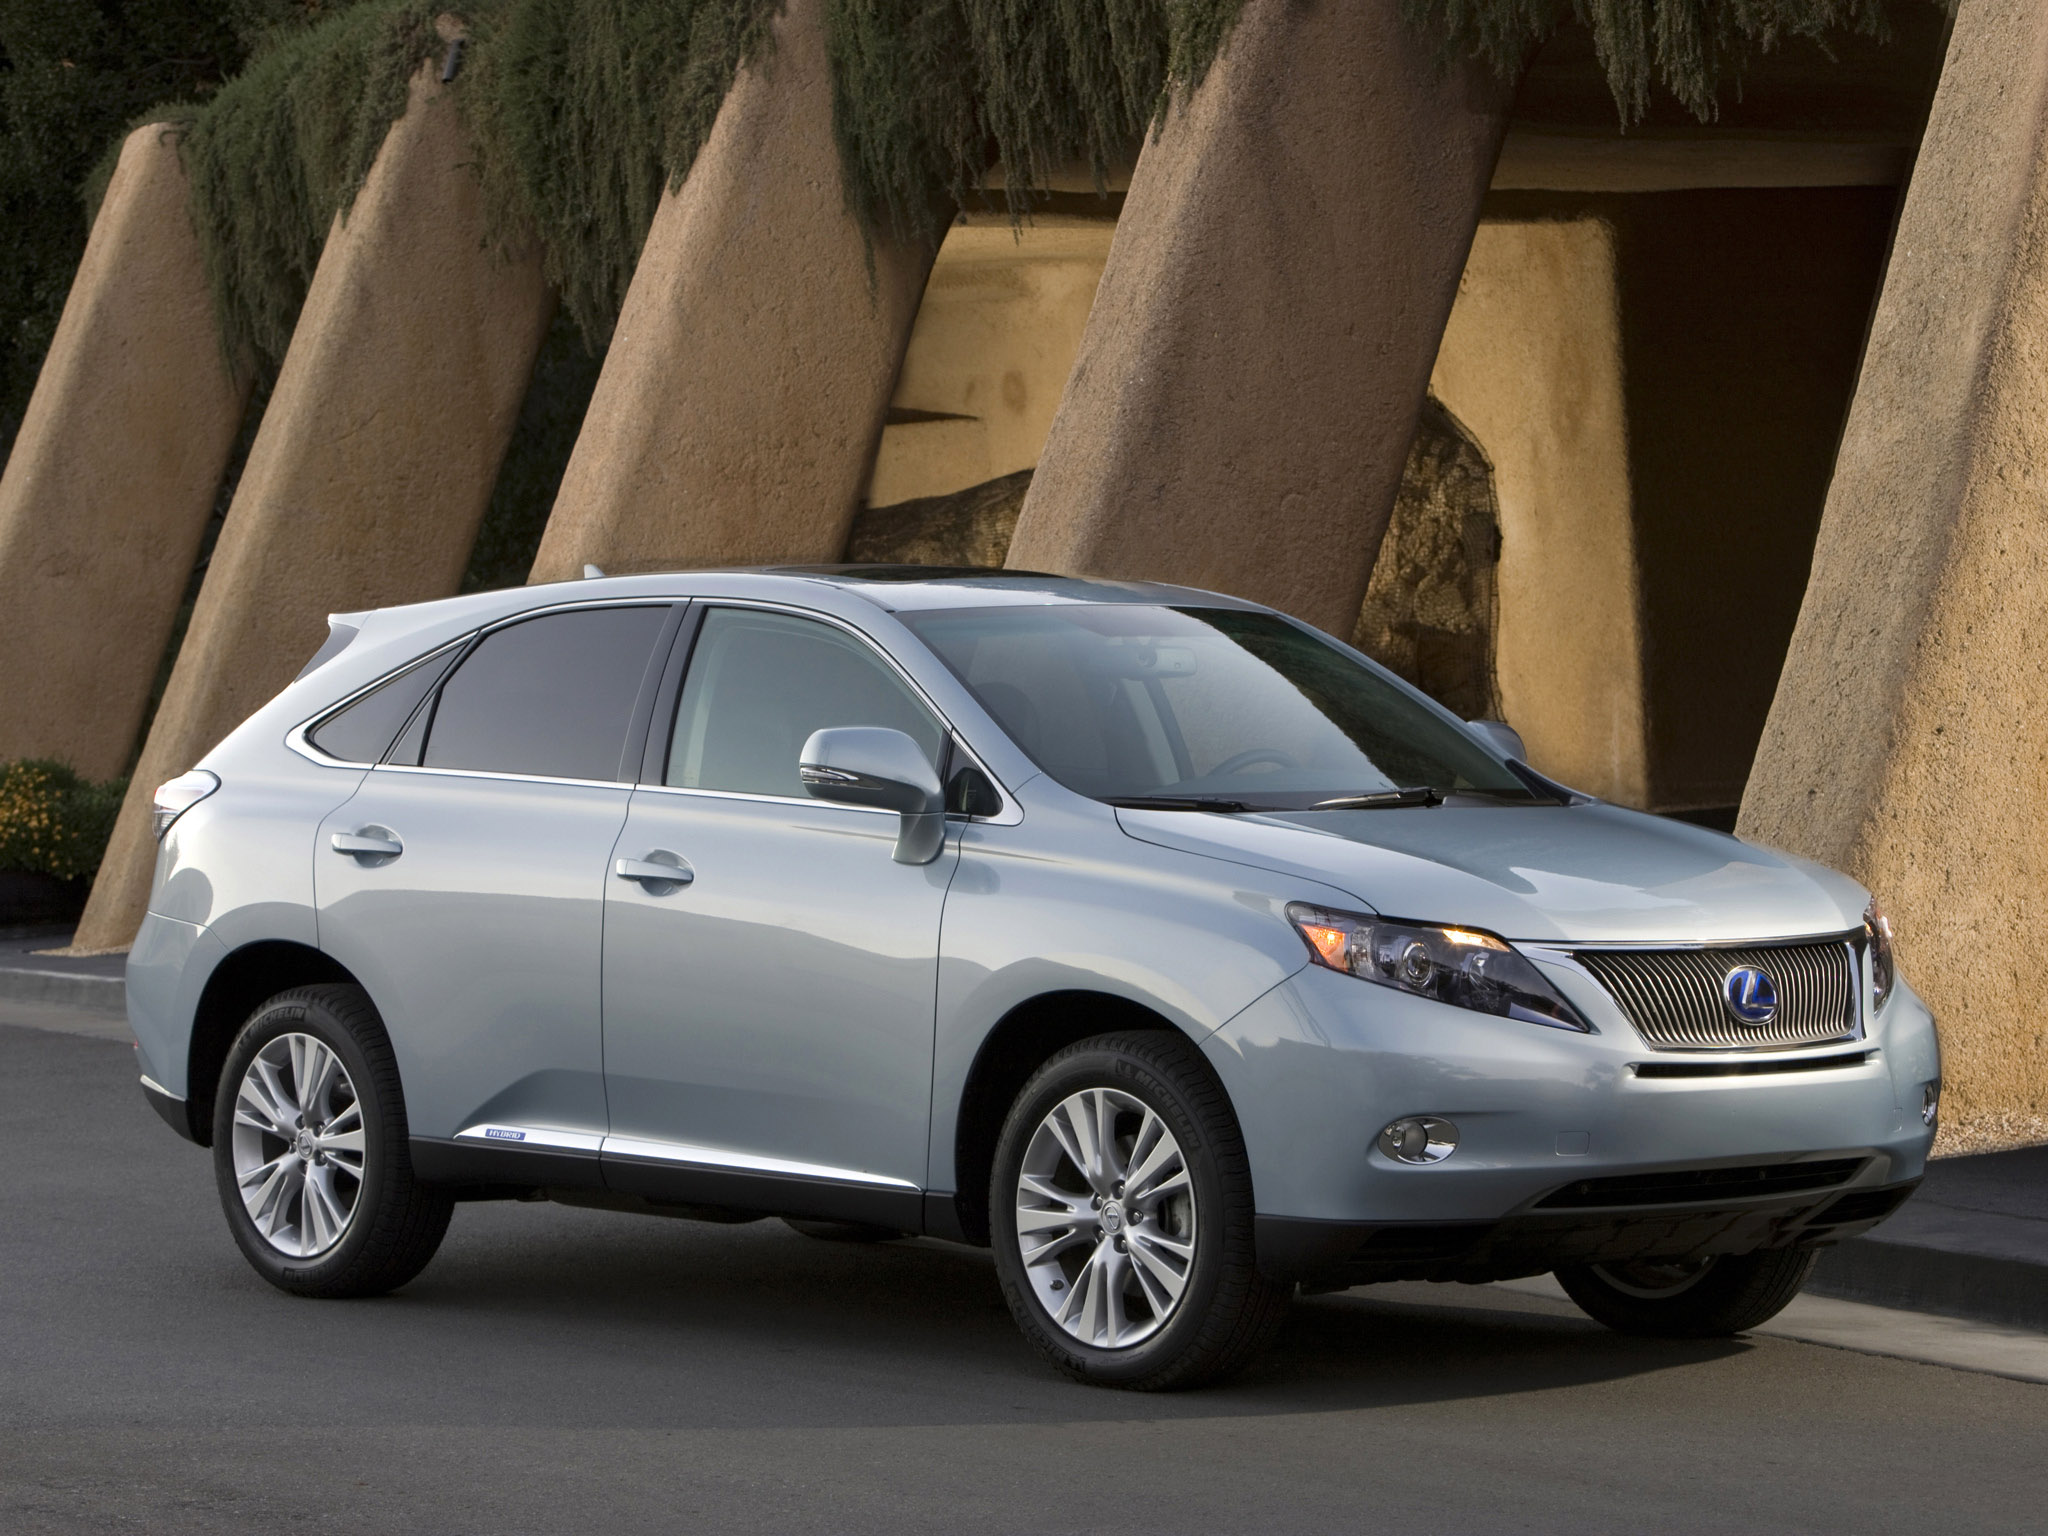 Car in pictures car photo gallery » Lexus RX 450h 2009